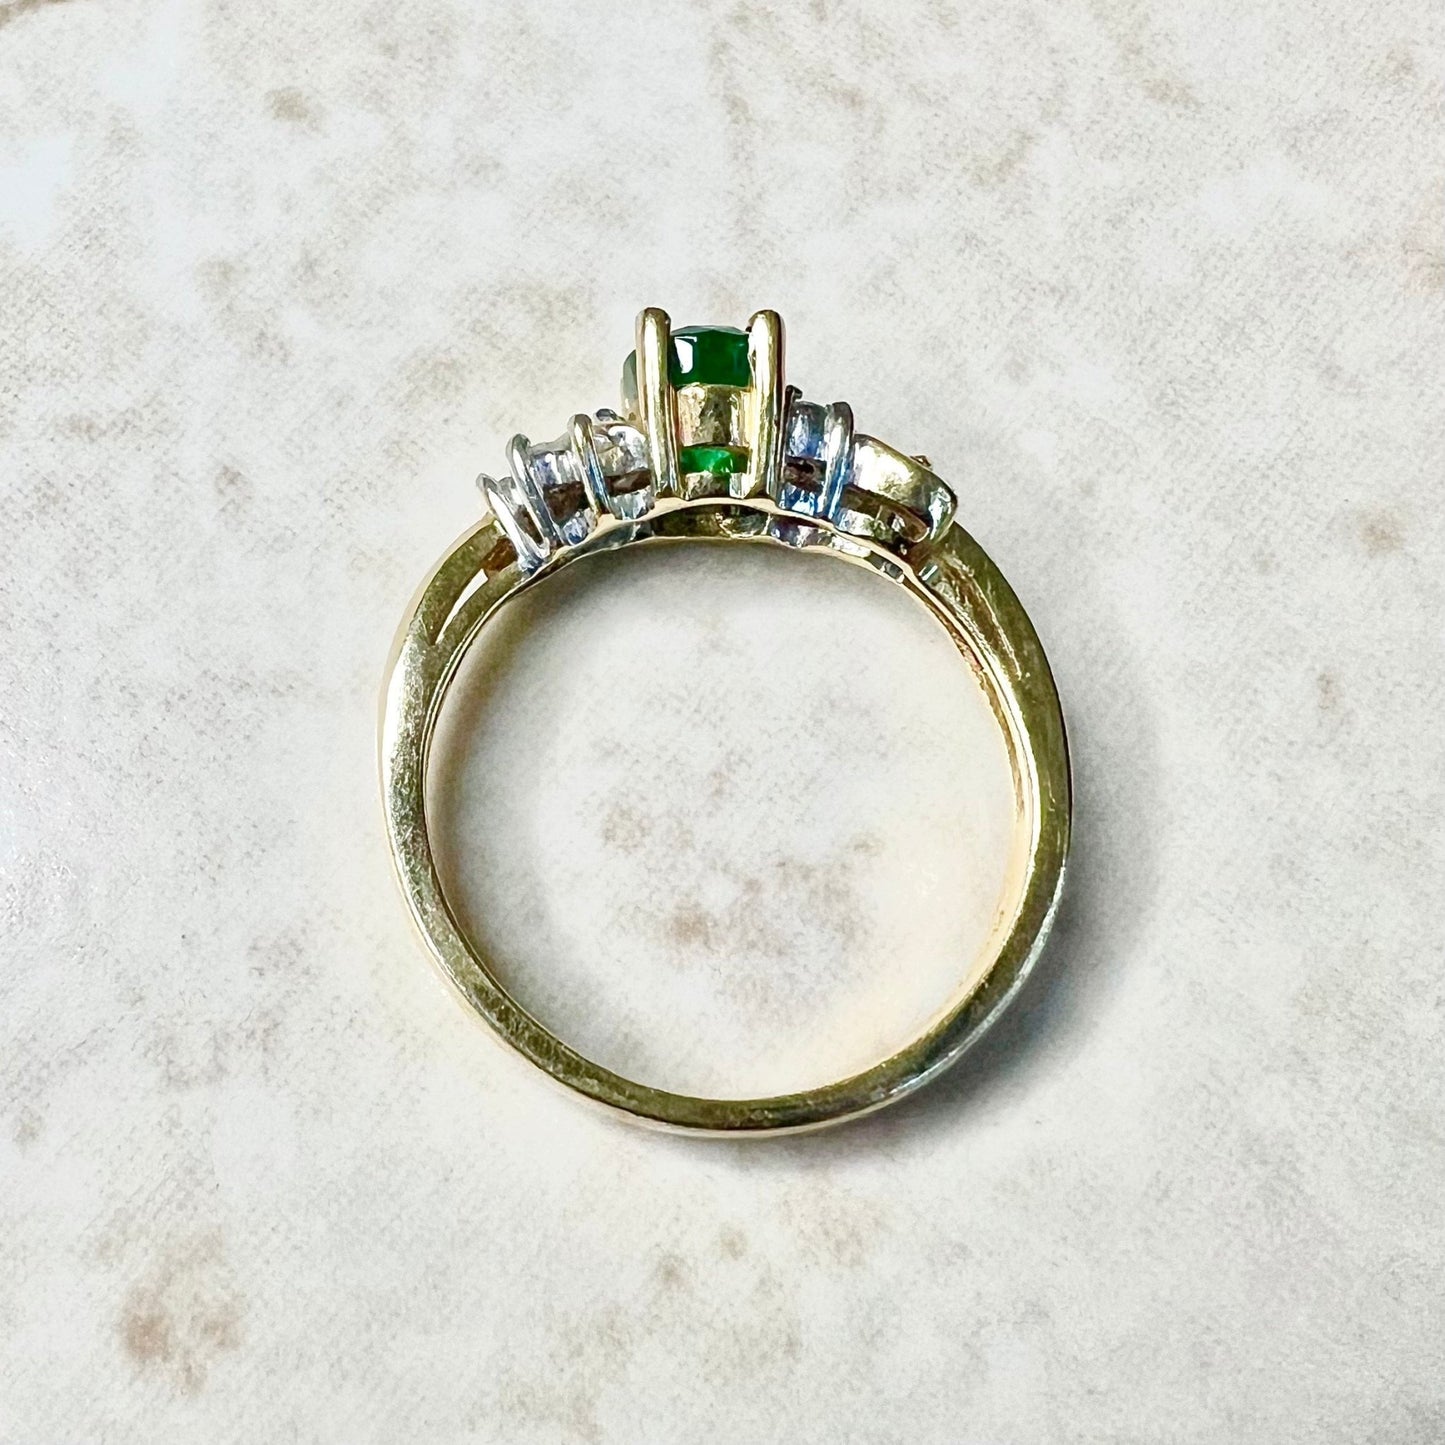 Vintage 14K Natural Emerald Ring - Yellow Gold Diamond & Emerald Solitaire Ring - Cocktail Ring - Engagement Ring - May Birthstone Ring